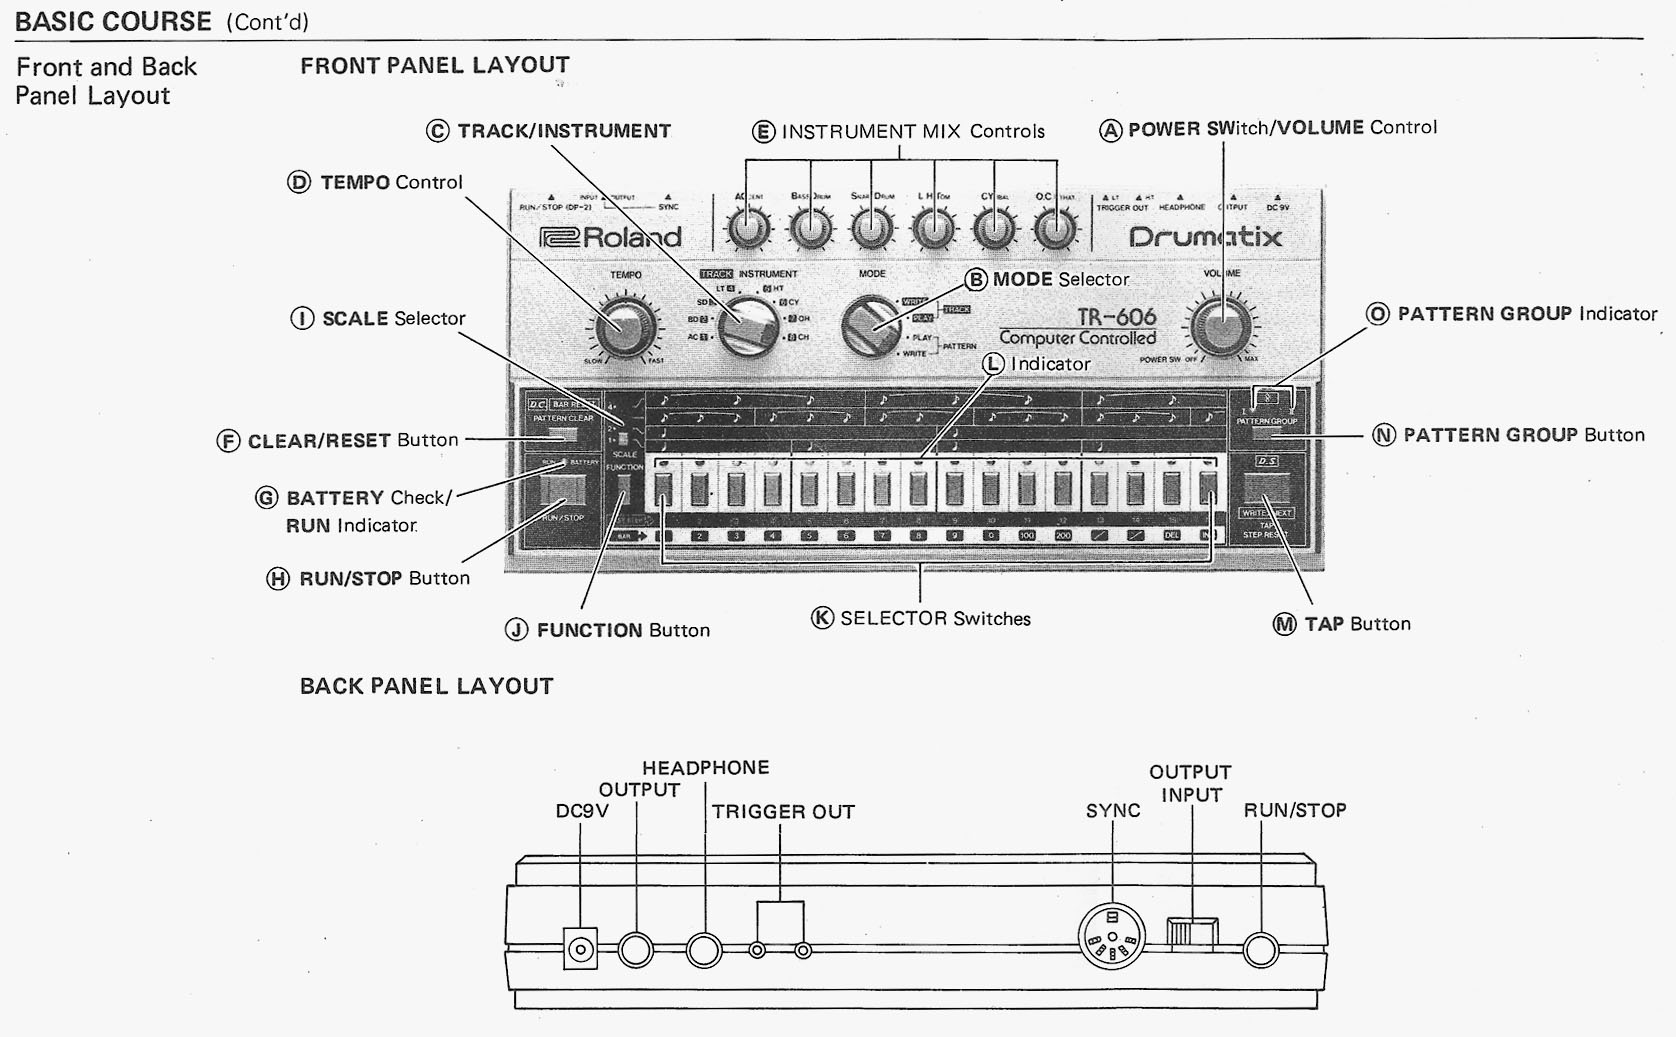 page6.jpg - scan of front panel with labels for each button and knob